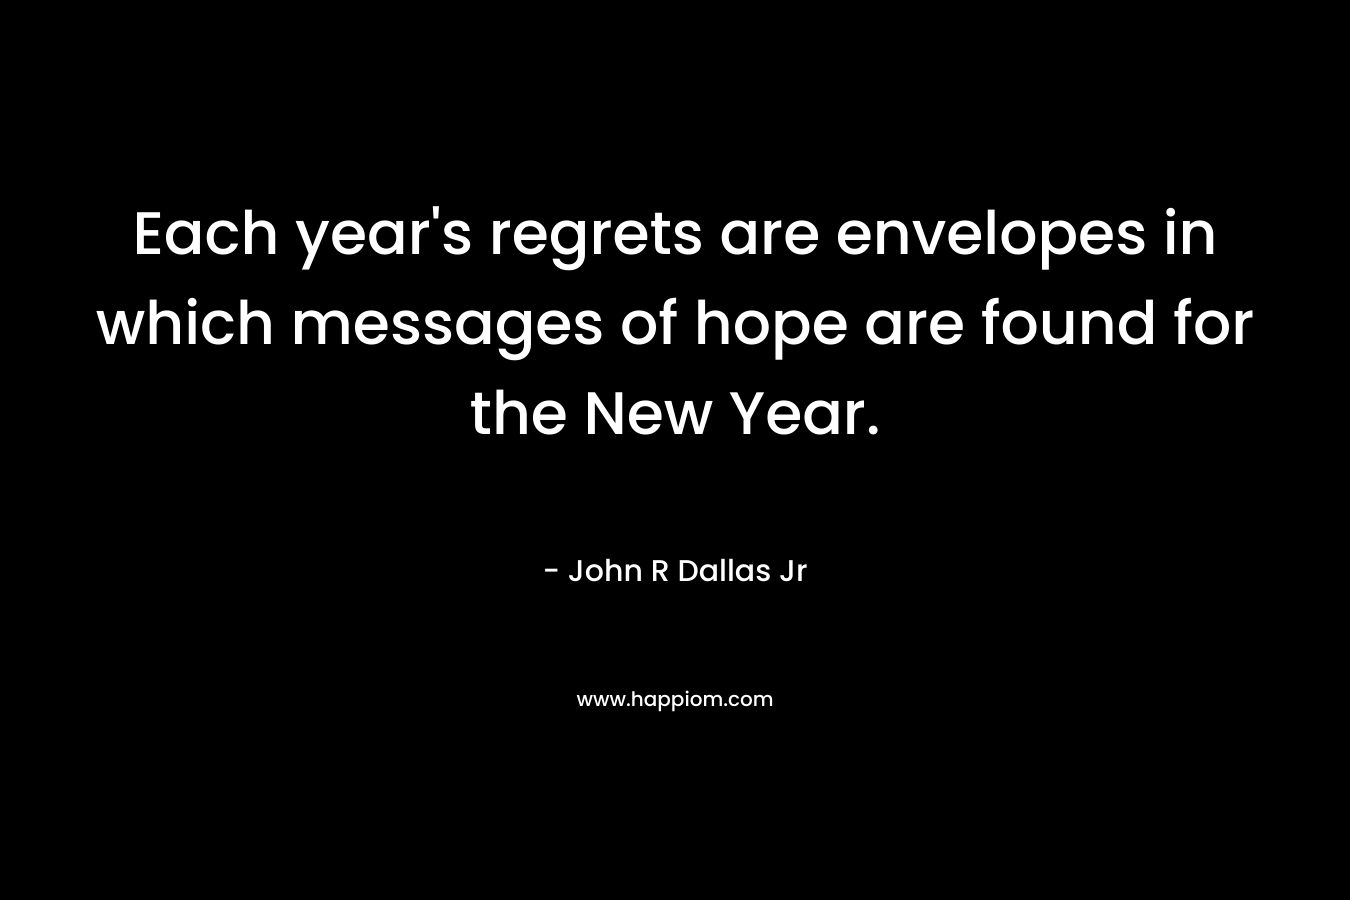 Each year’s regrets are envelopes in which messages of hope are found for the New Year. – John R Dallas Jr